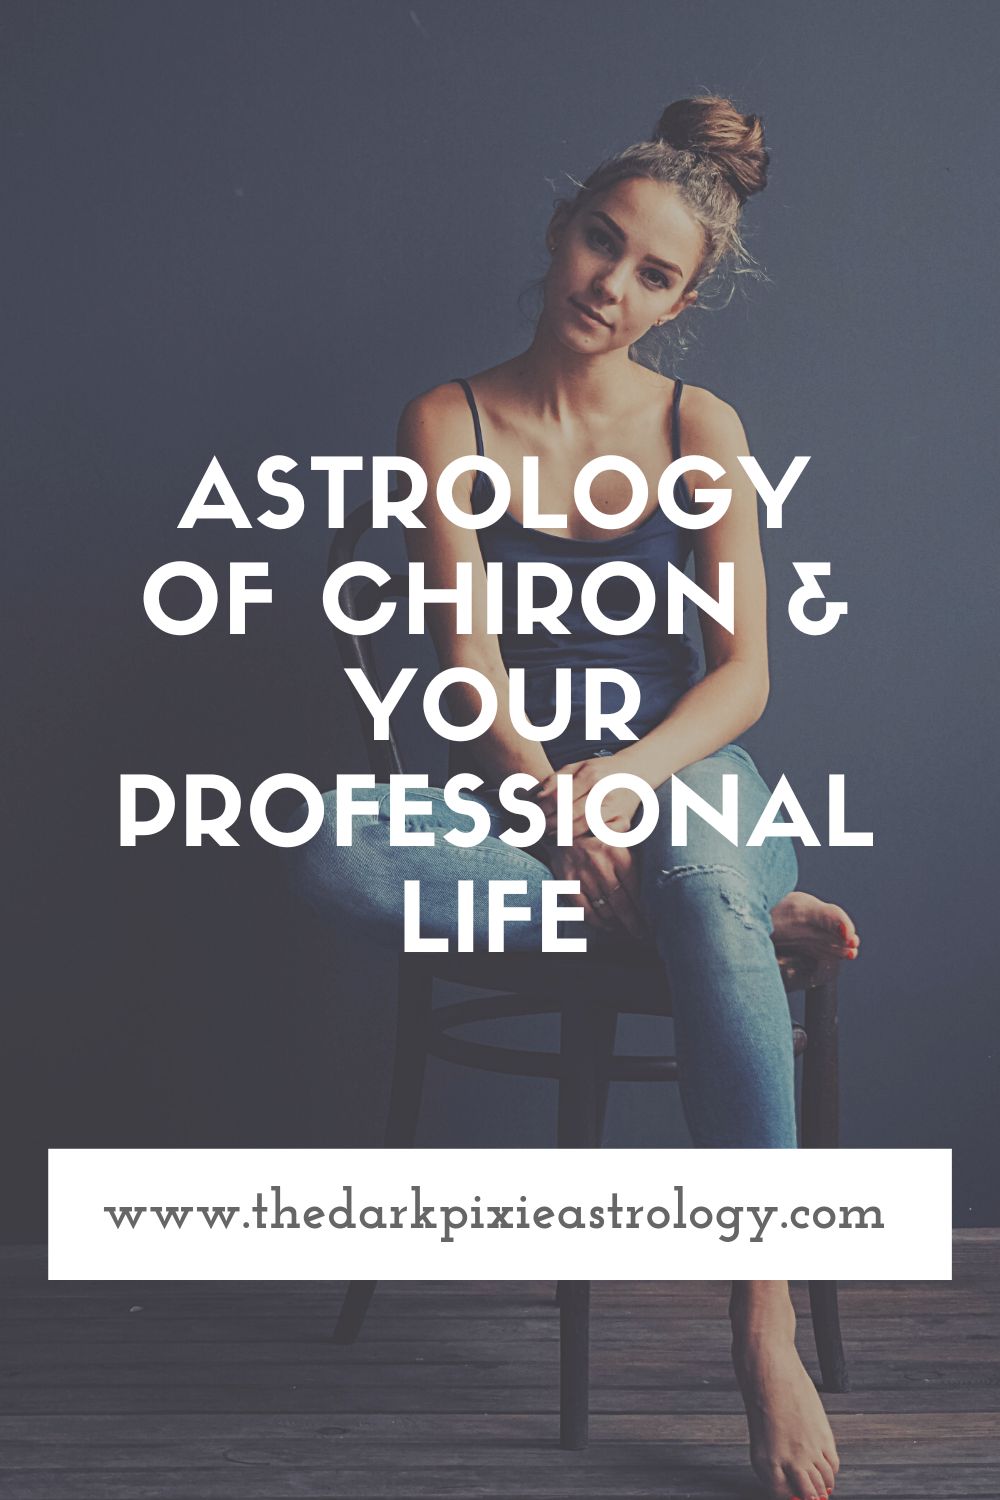 Astrology of Chiron & Your Professional Life - The Dark Pixie Astrology